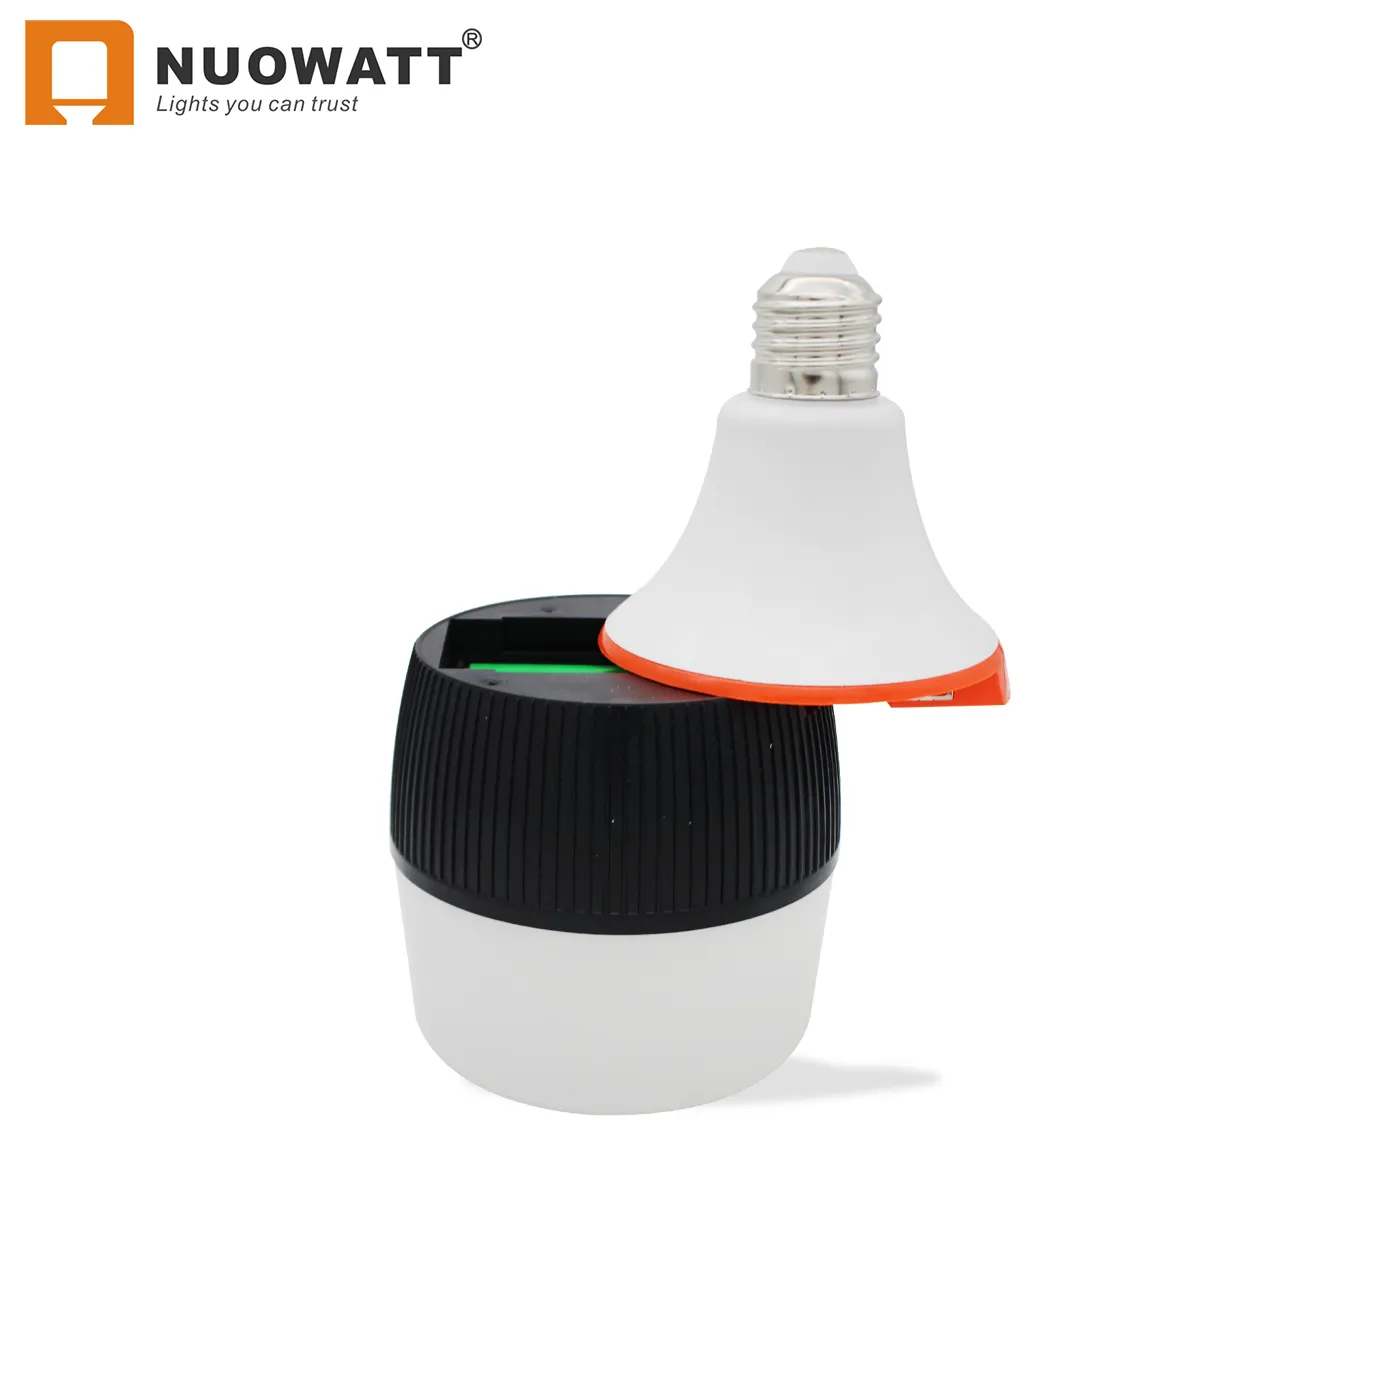 High watts 30w detachable structure designing with 2pcs 1200maH batteries rechargeable led bulb replacements